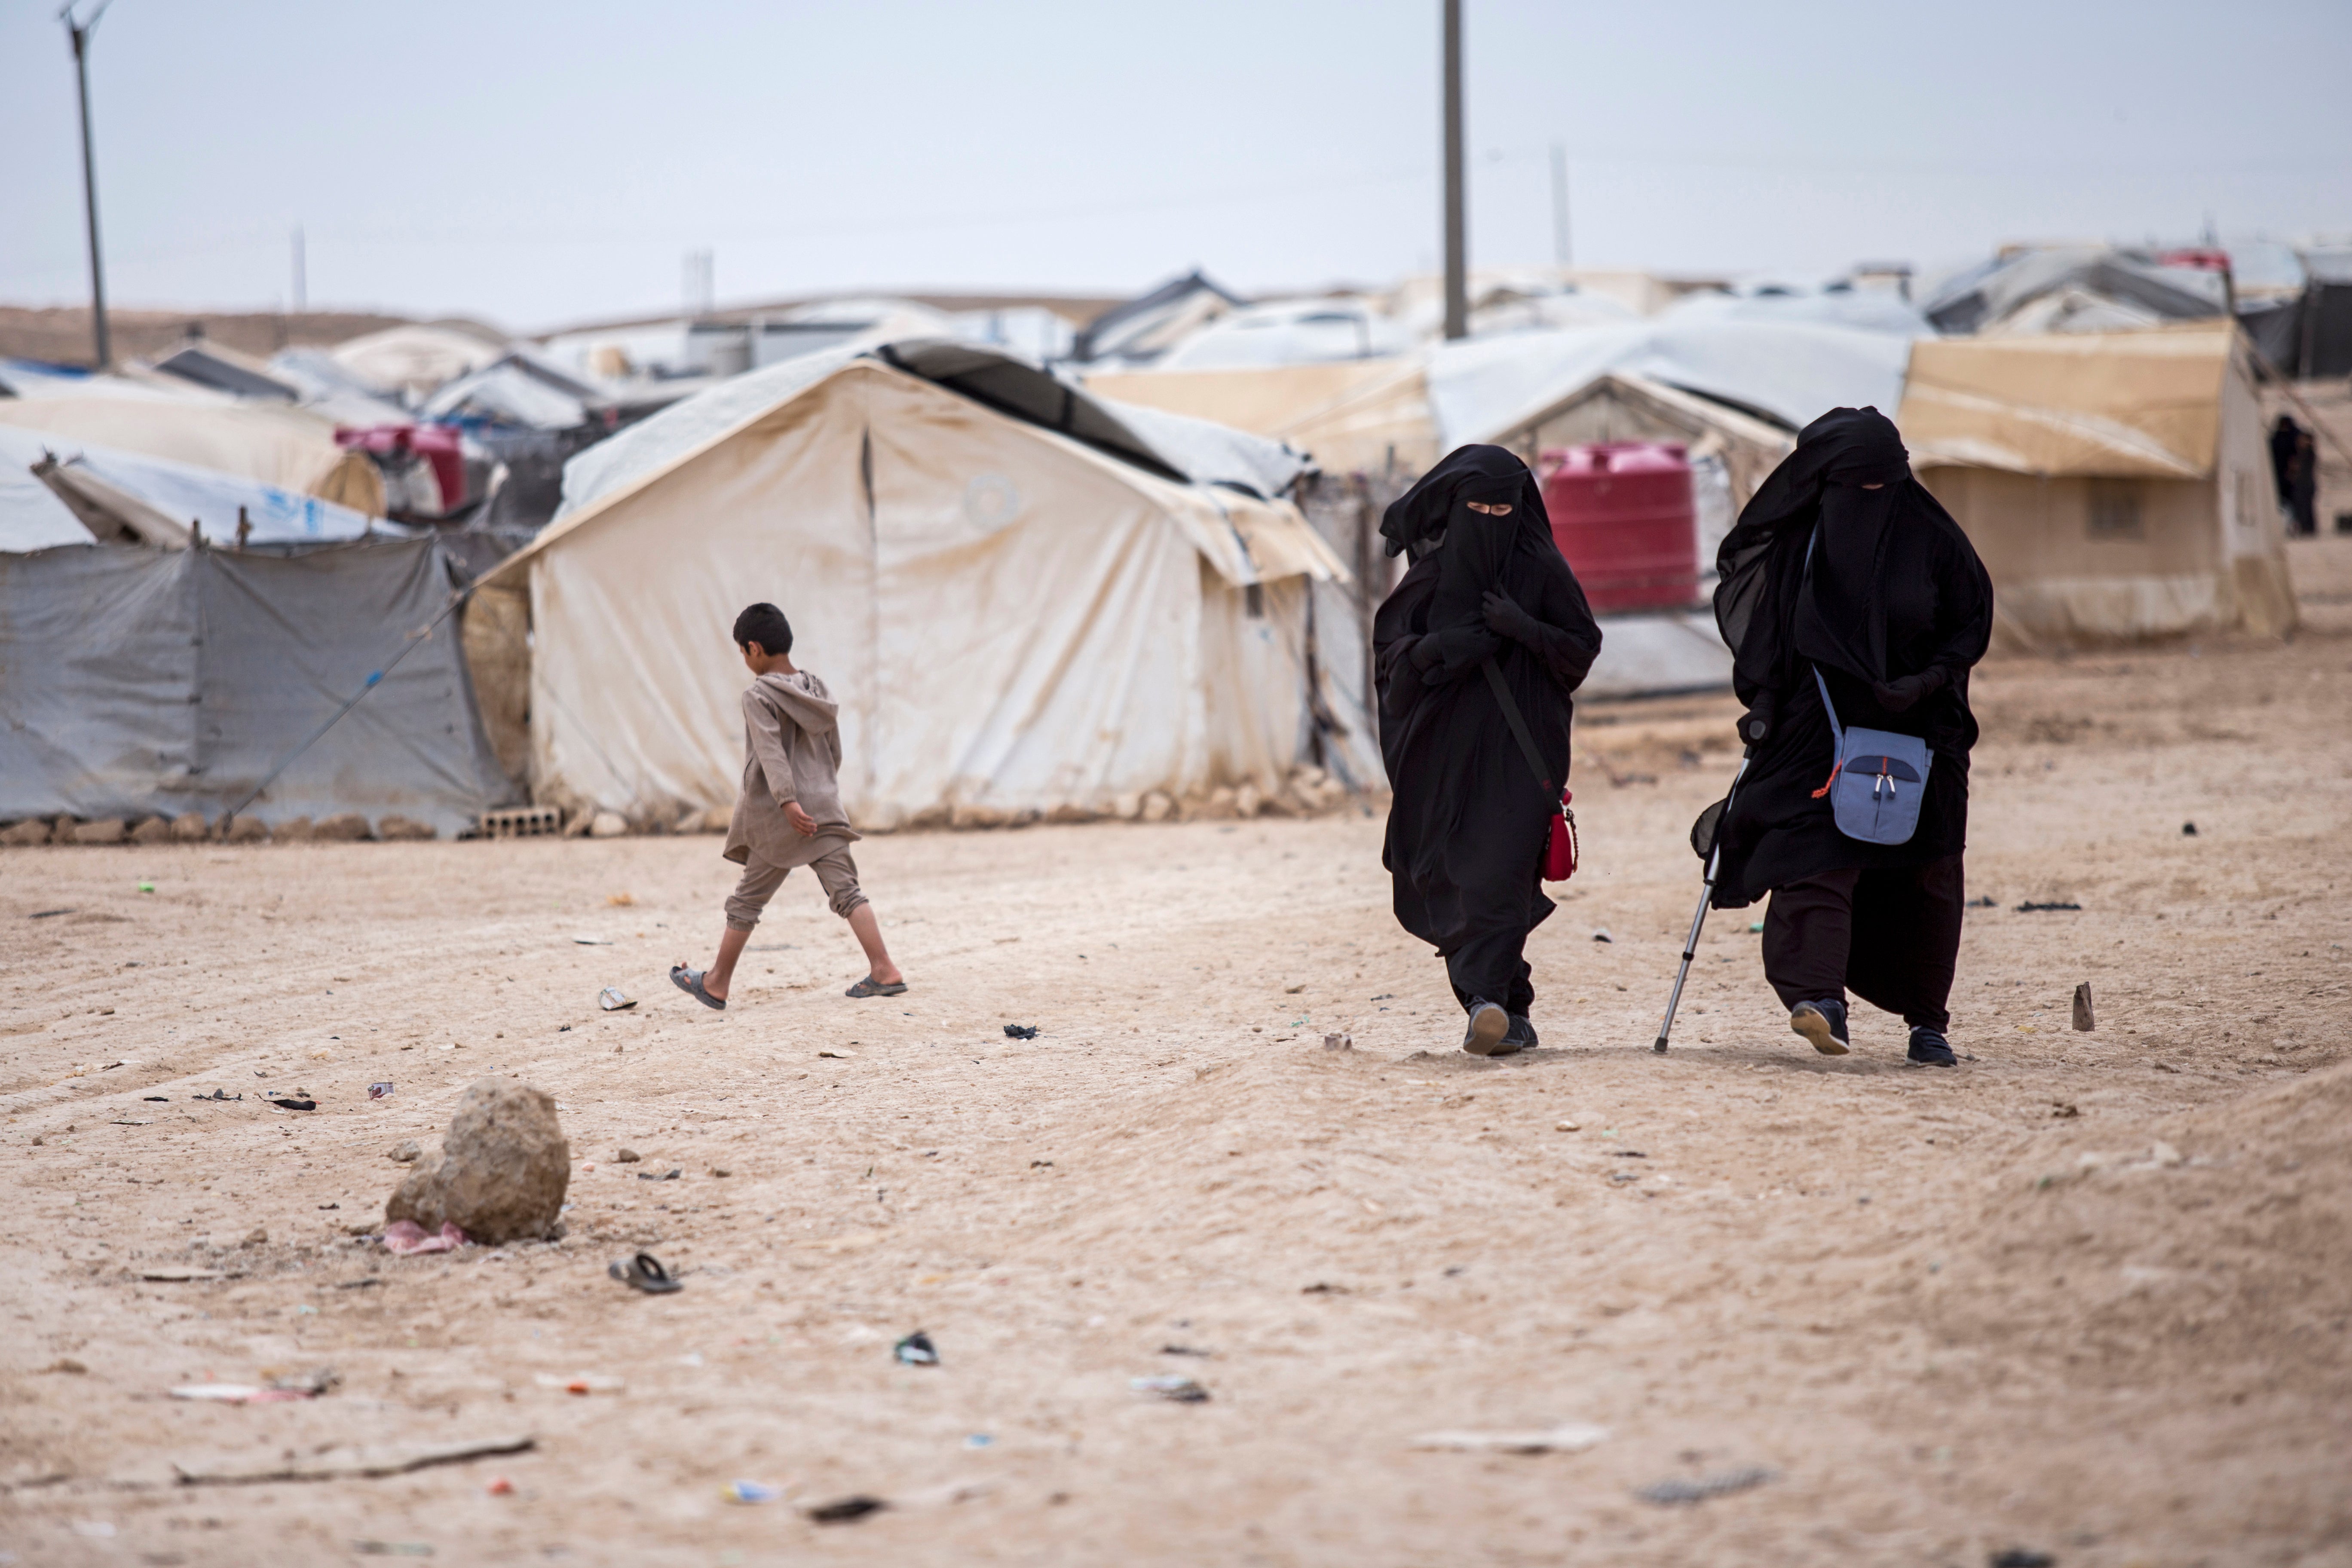 Women walk in the al-Hol camp that houses some 60,000 refugees, including families and supporters of the Islamic State group